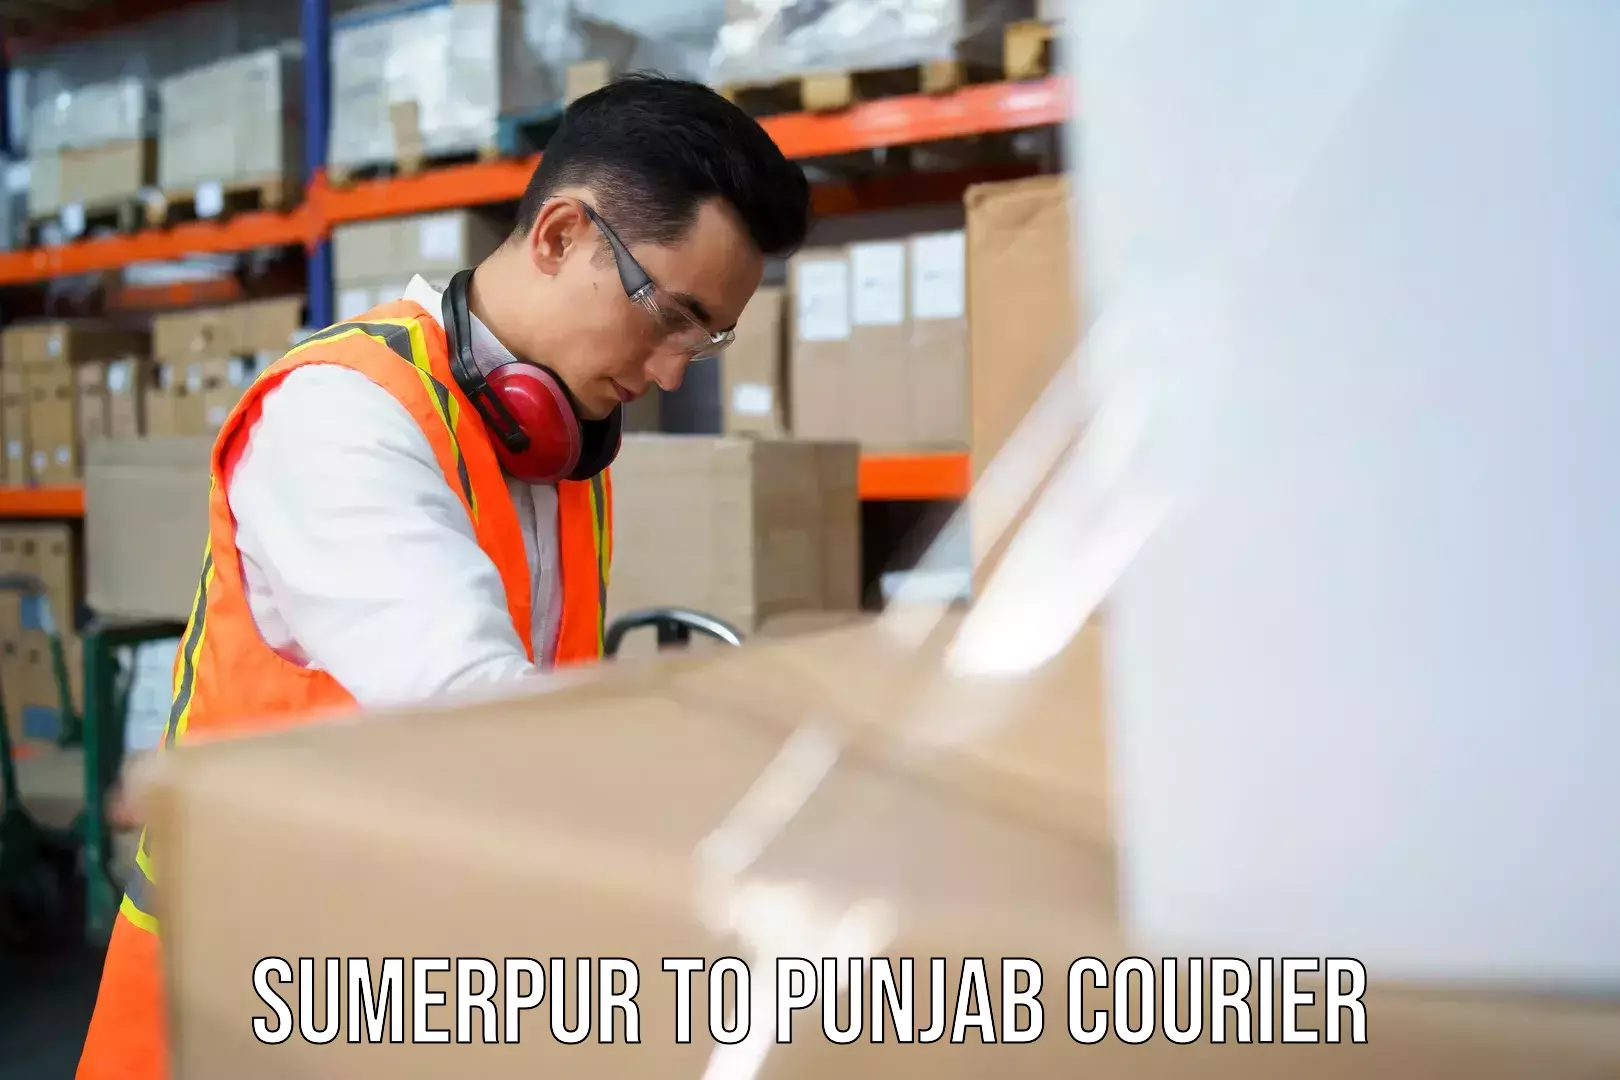 Courier service partnerships Sumerpur to Punjab